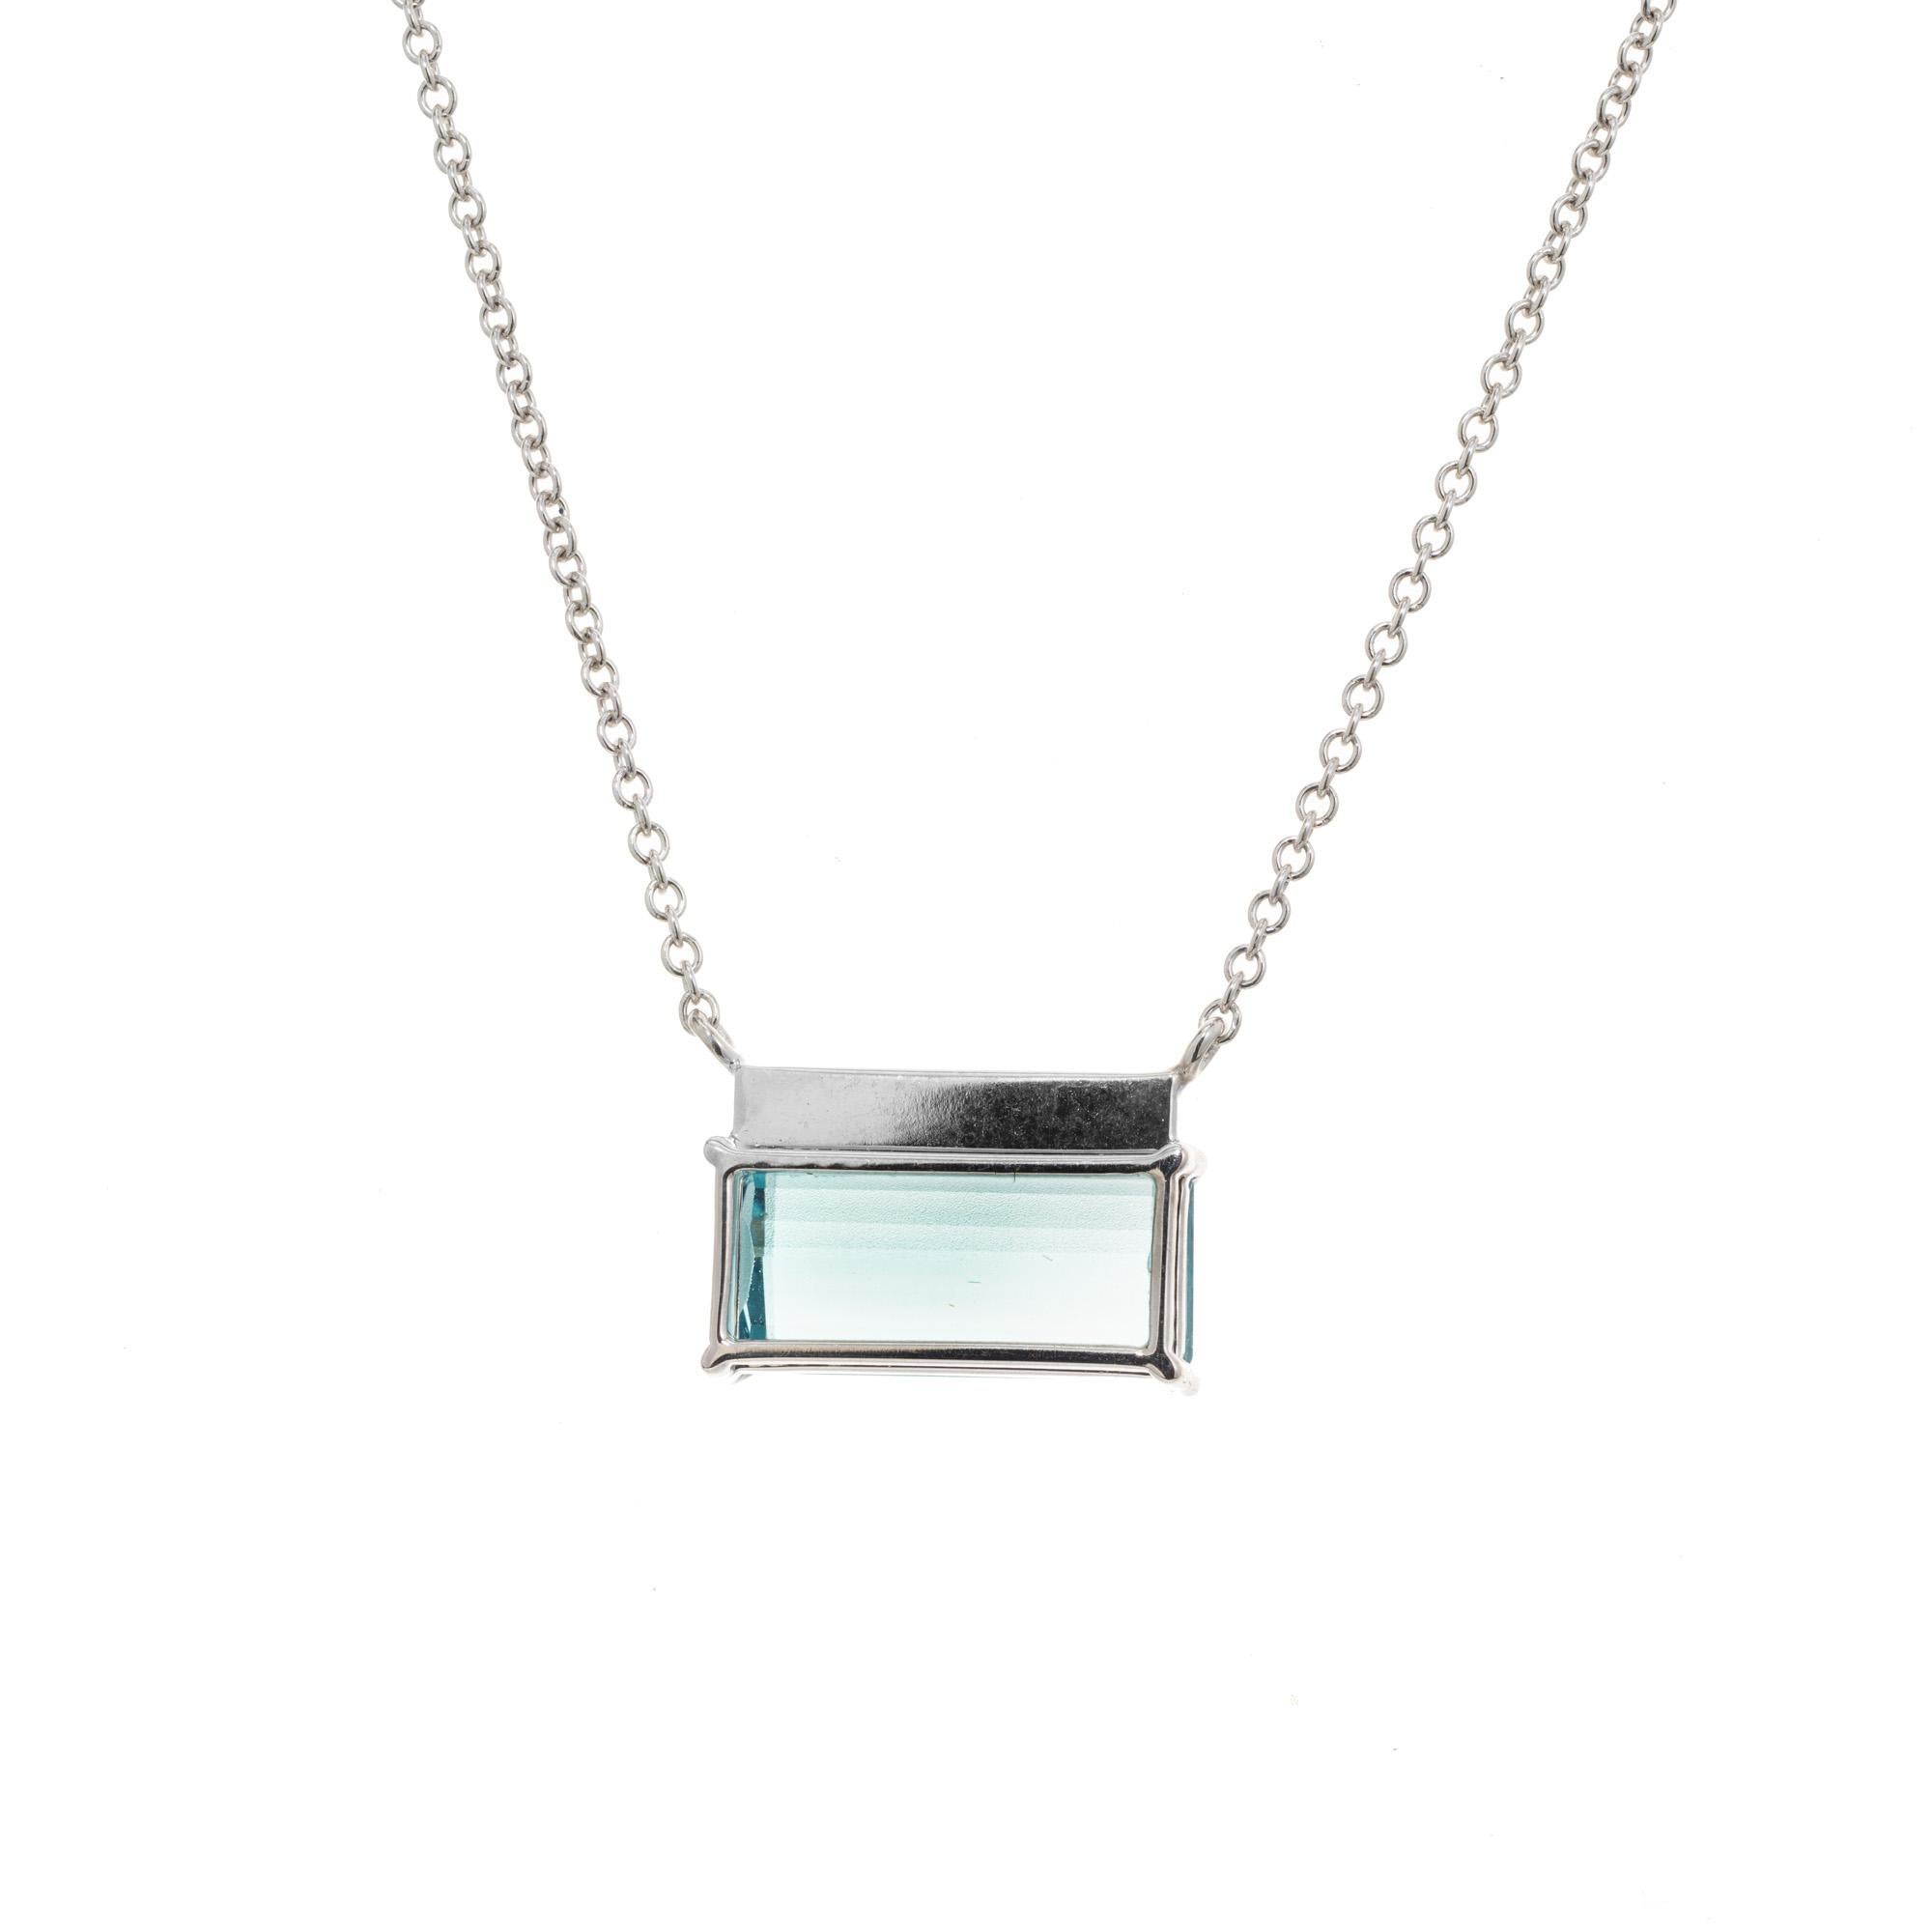 Peter Suchy 3.60 Carat Rectangle Aqua Diamond White Gold Pendant Necklace In New Condition For Sale In Stamford, CT